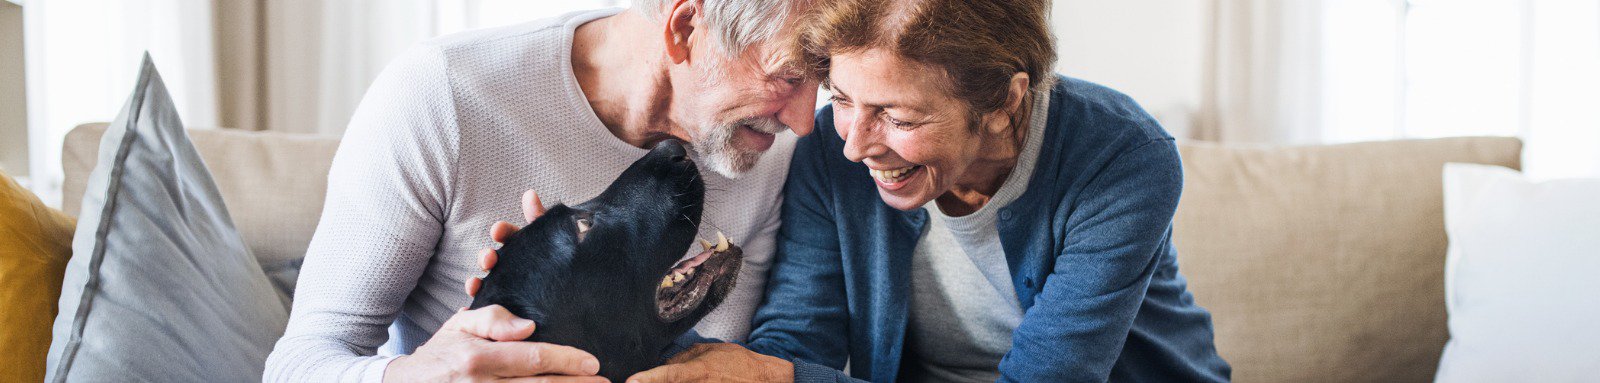 Older couple on couch patting dog